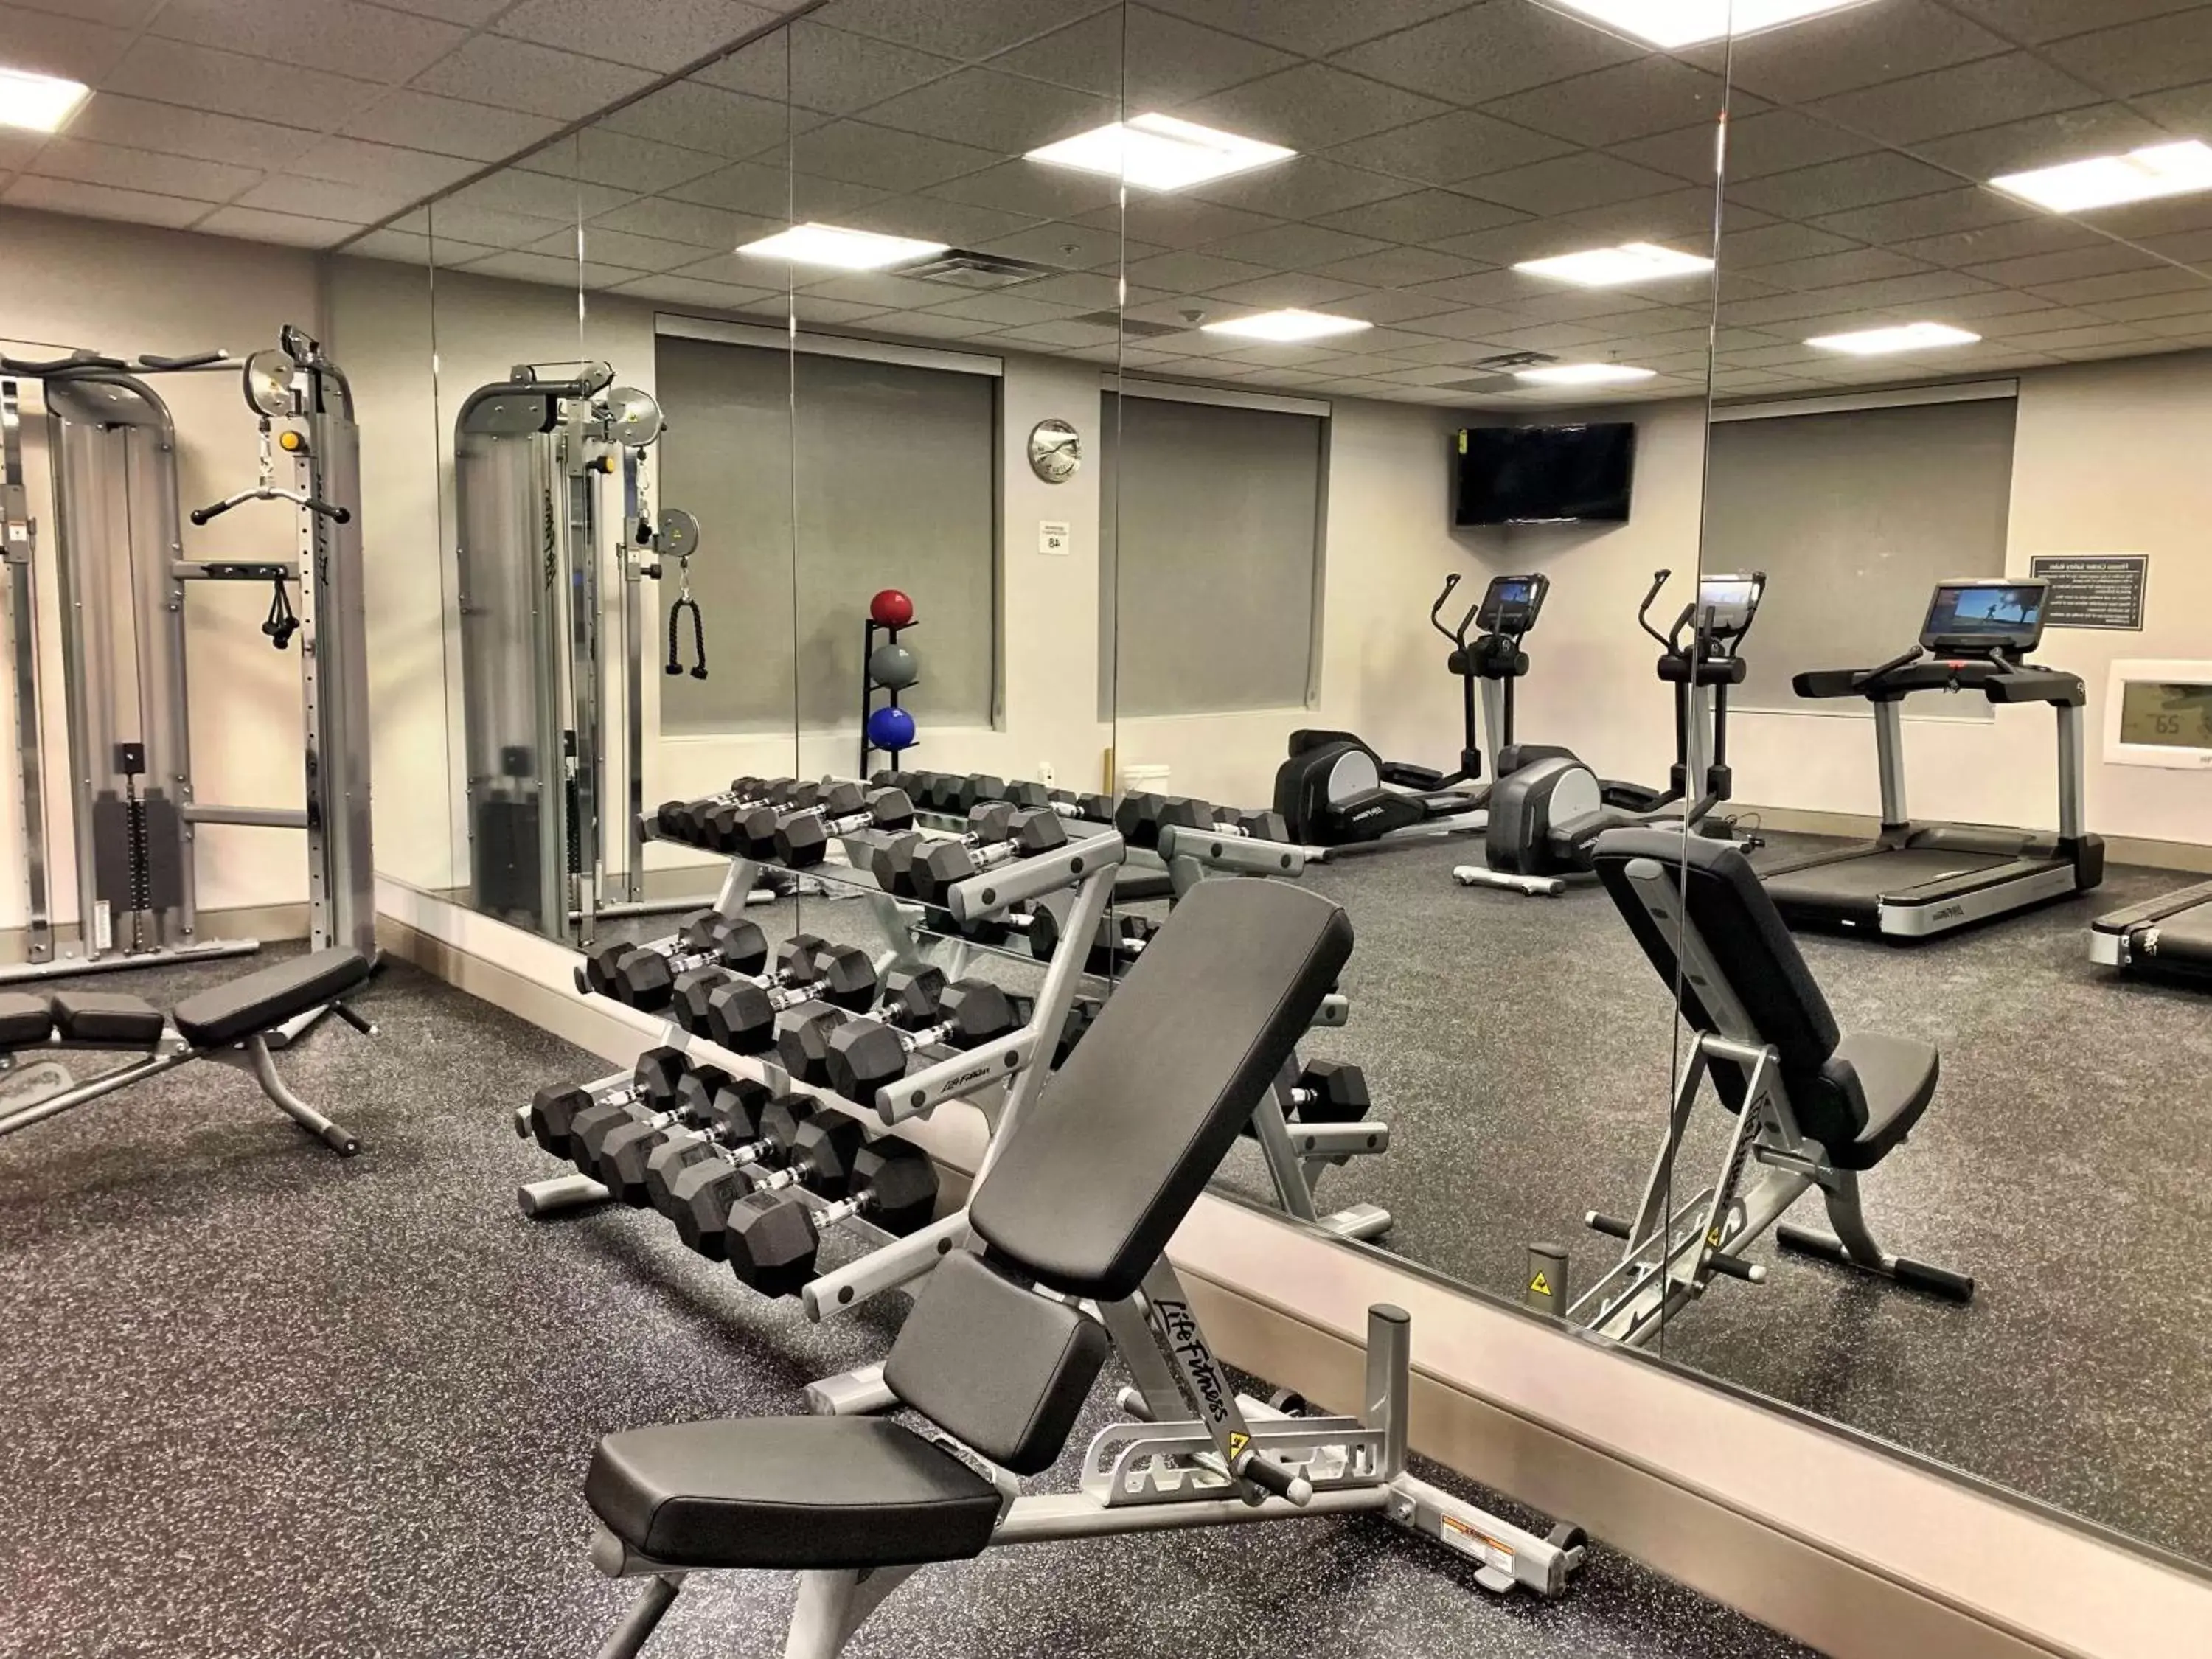 Fitness centre/facilities, Fitness Center/Facilities in Best Western Premier Hotel at Fisher's Landing